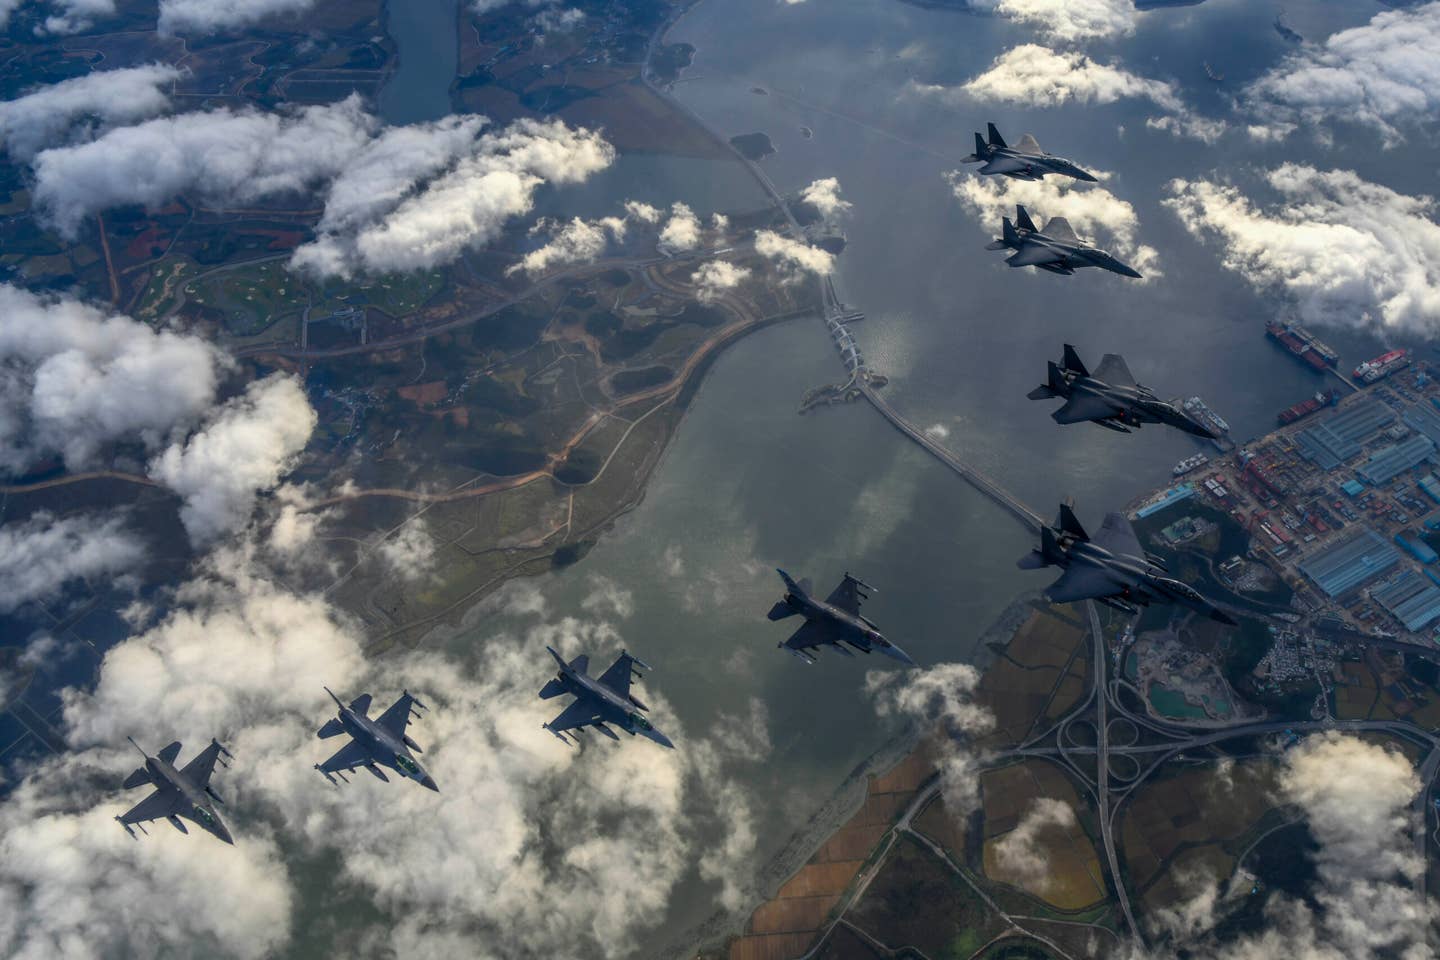 ROKAF F-15Ks and U.S. Air Force F-16 fighter jets fly over the Korean peninsula in response to the North Korean IRBM launch on October 4, 2022. <em>Photo by South Korean Defense Ministry via Getty Images</em>